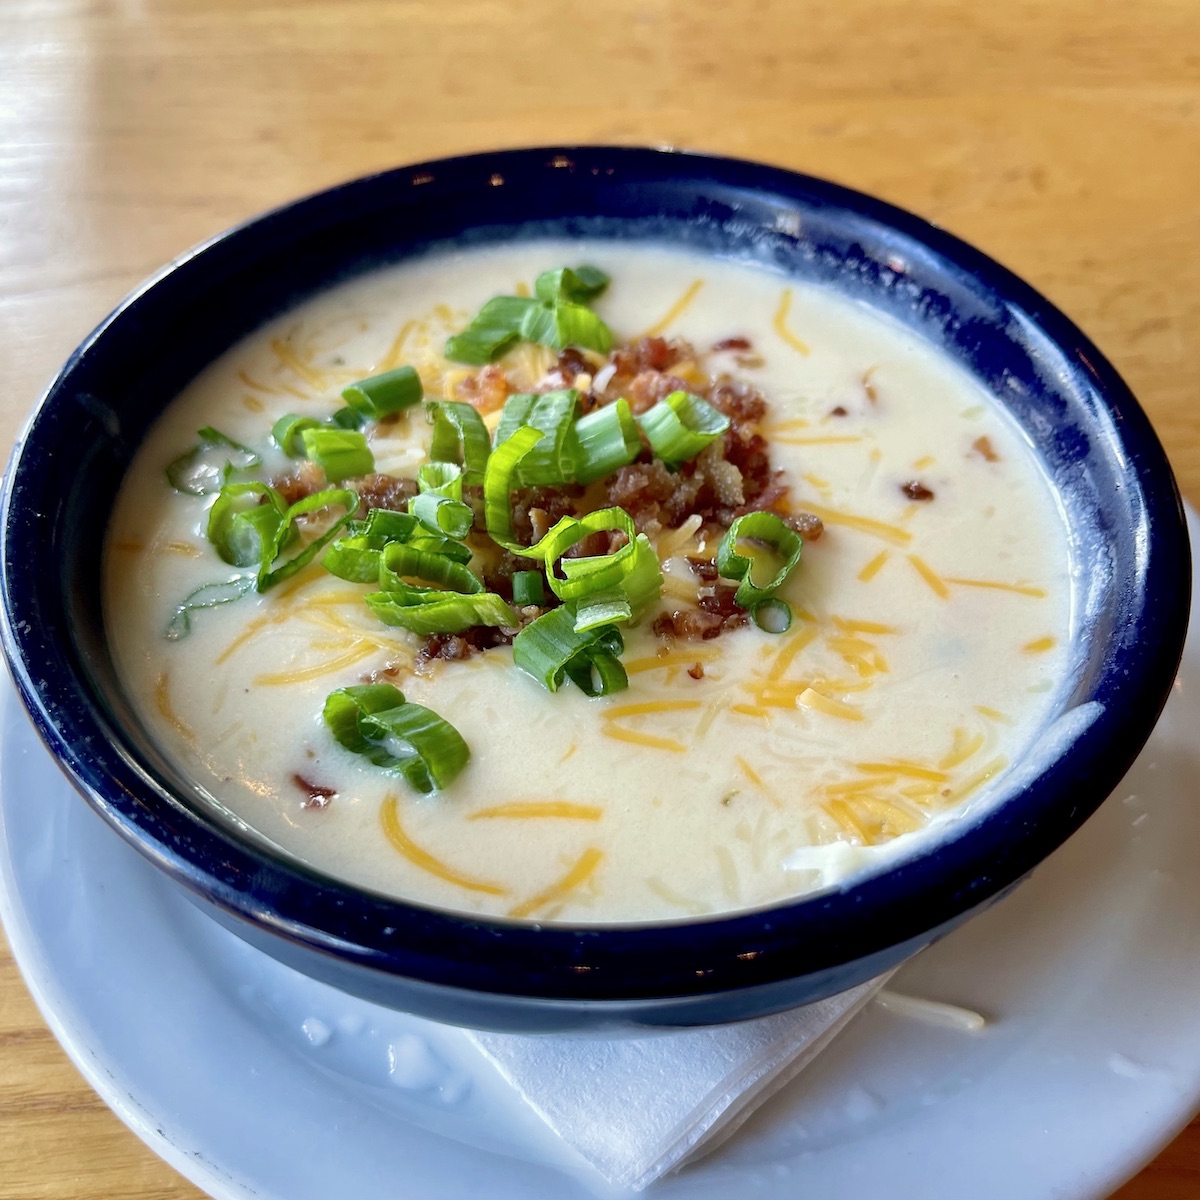 Potato Soup from Chili's Bar and Grill in Hollywood, Florida